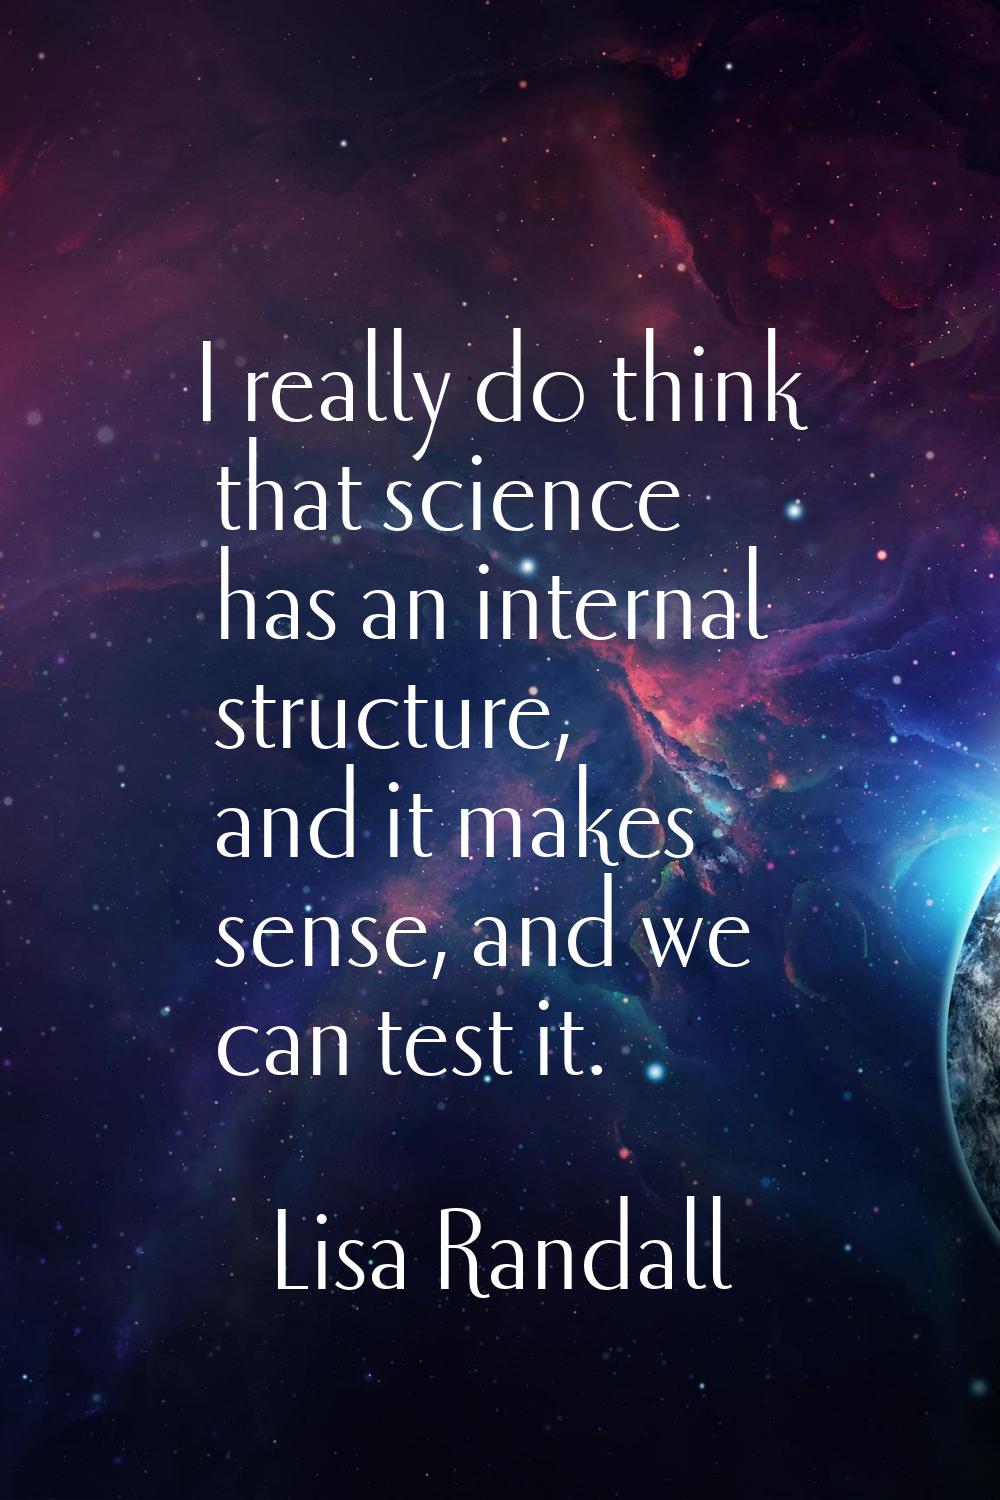 I really do think that science has an internal structure, and it makes sense, and we can test it.